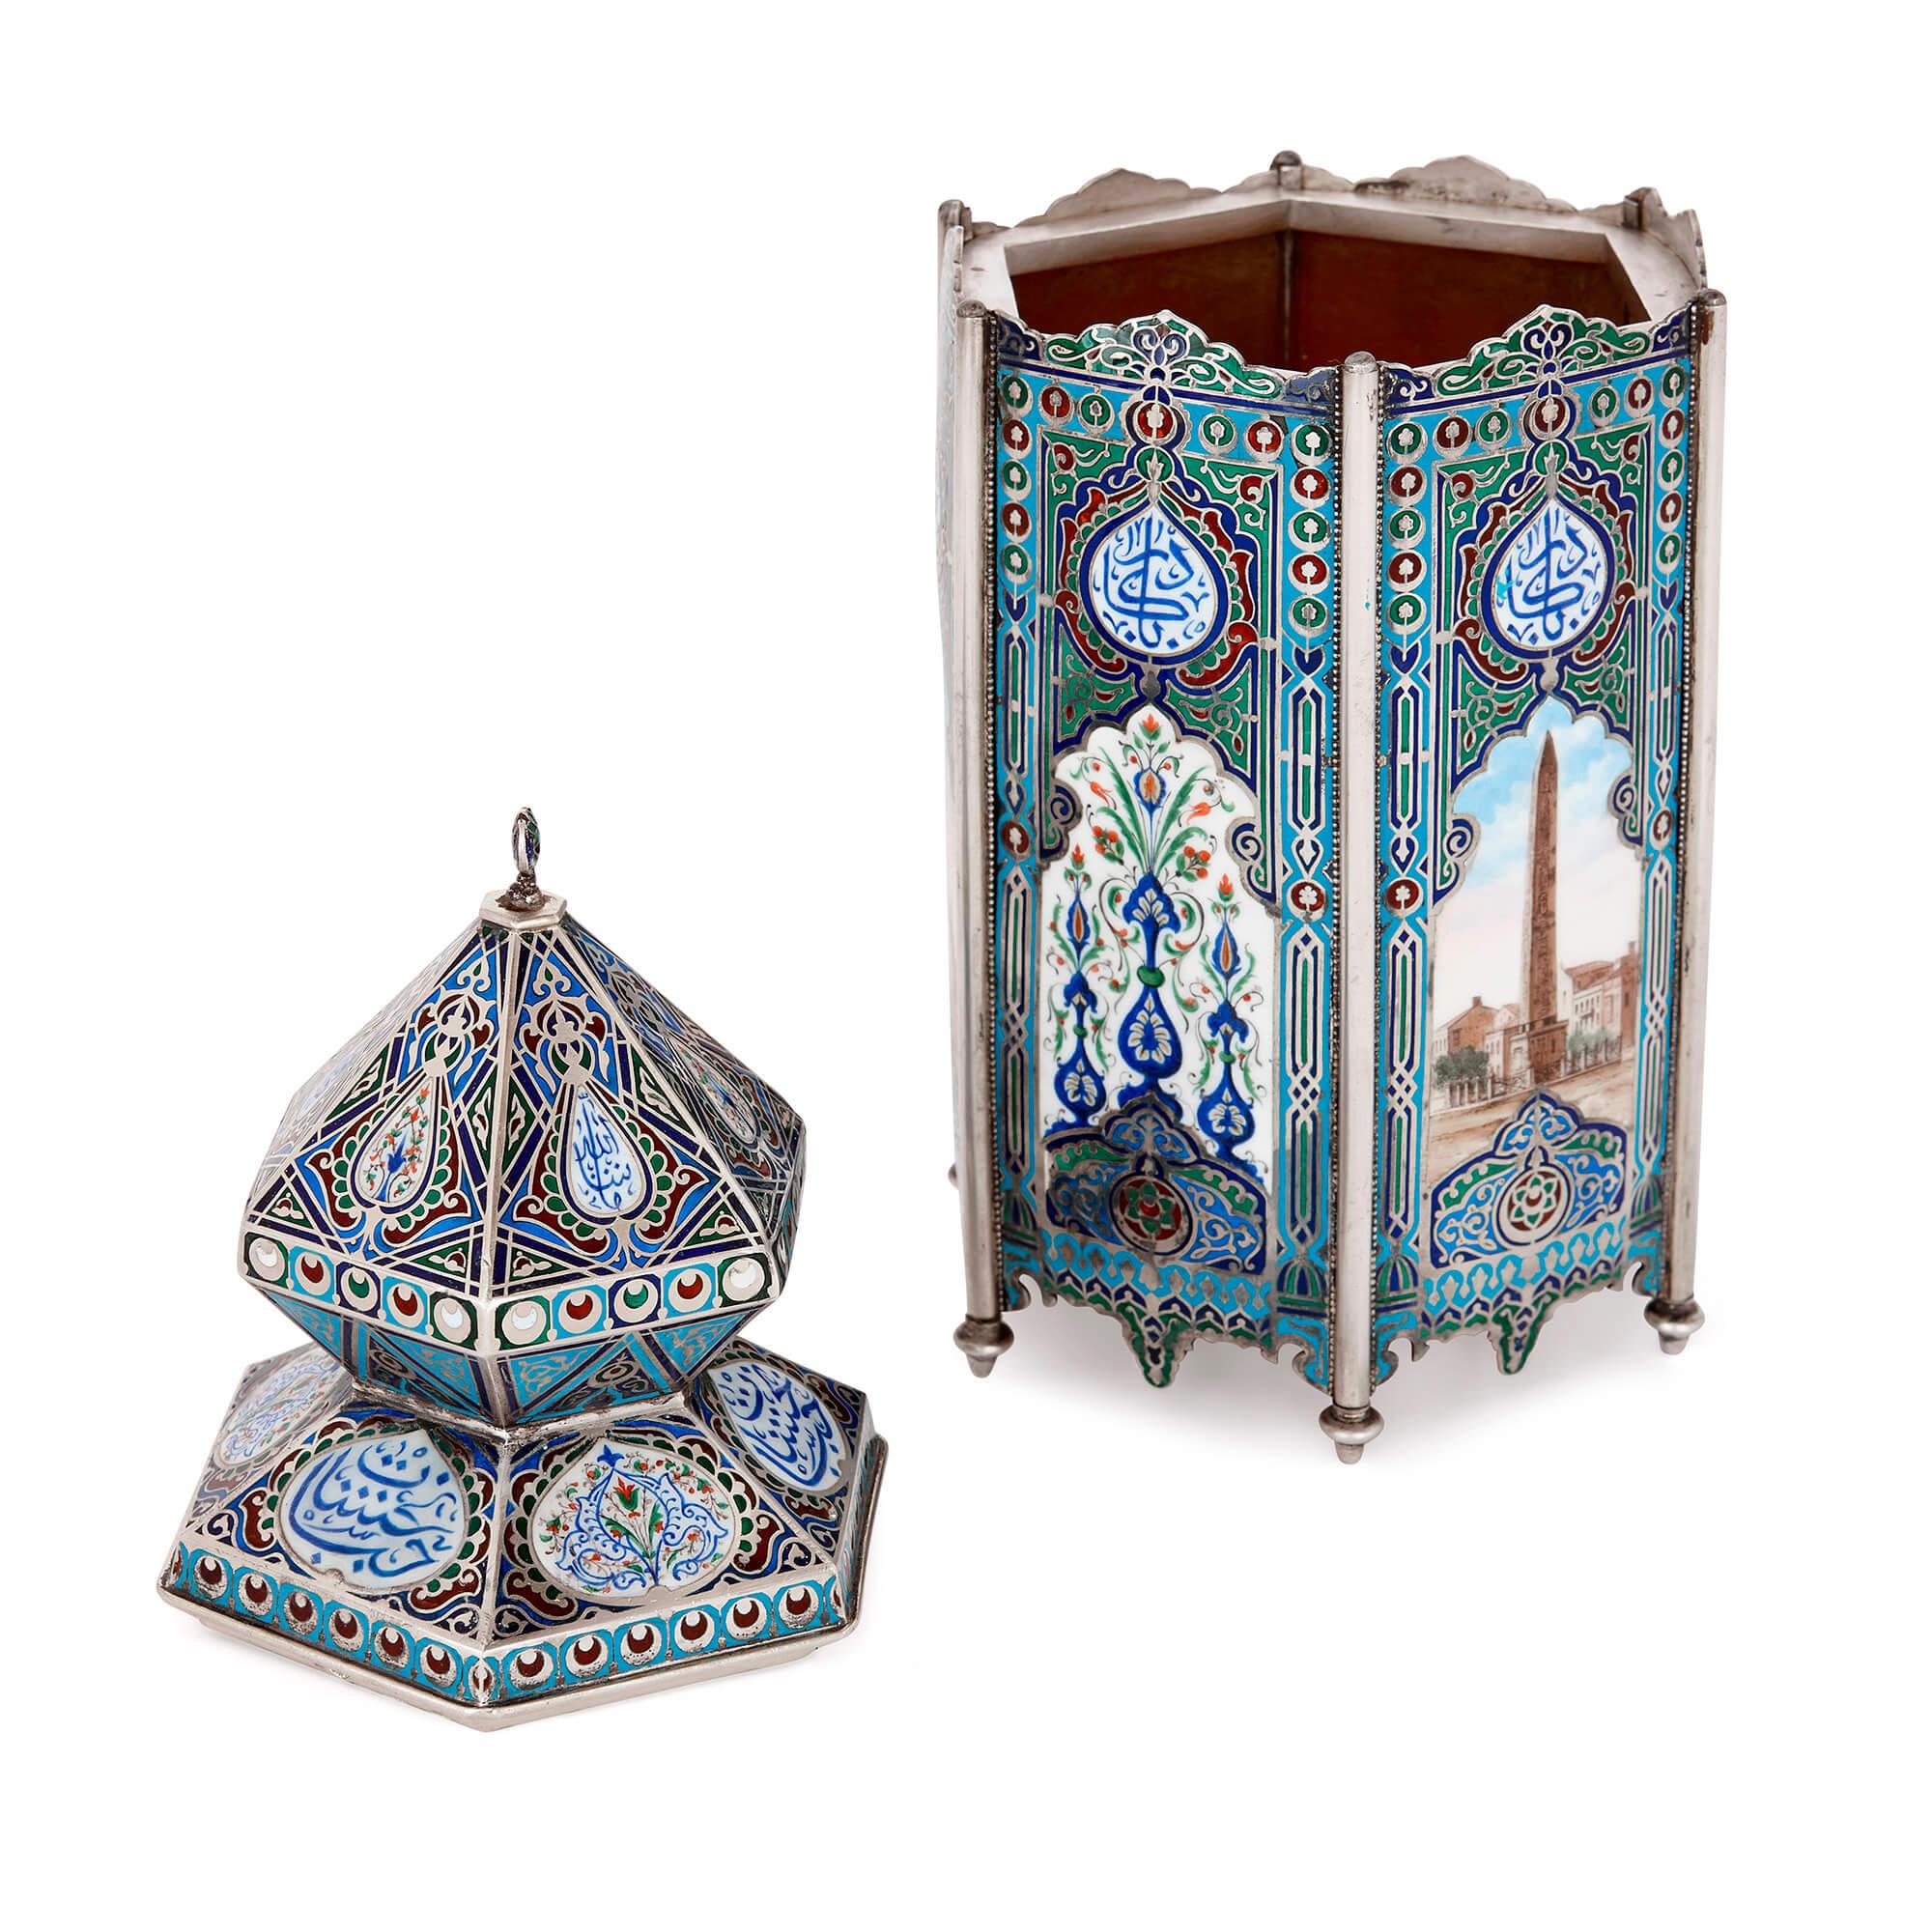 Unusual Russian-Made Silver and Enamel Islamic Vase In Good Condition For Sale In London, GB